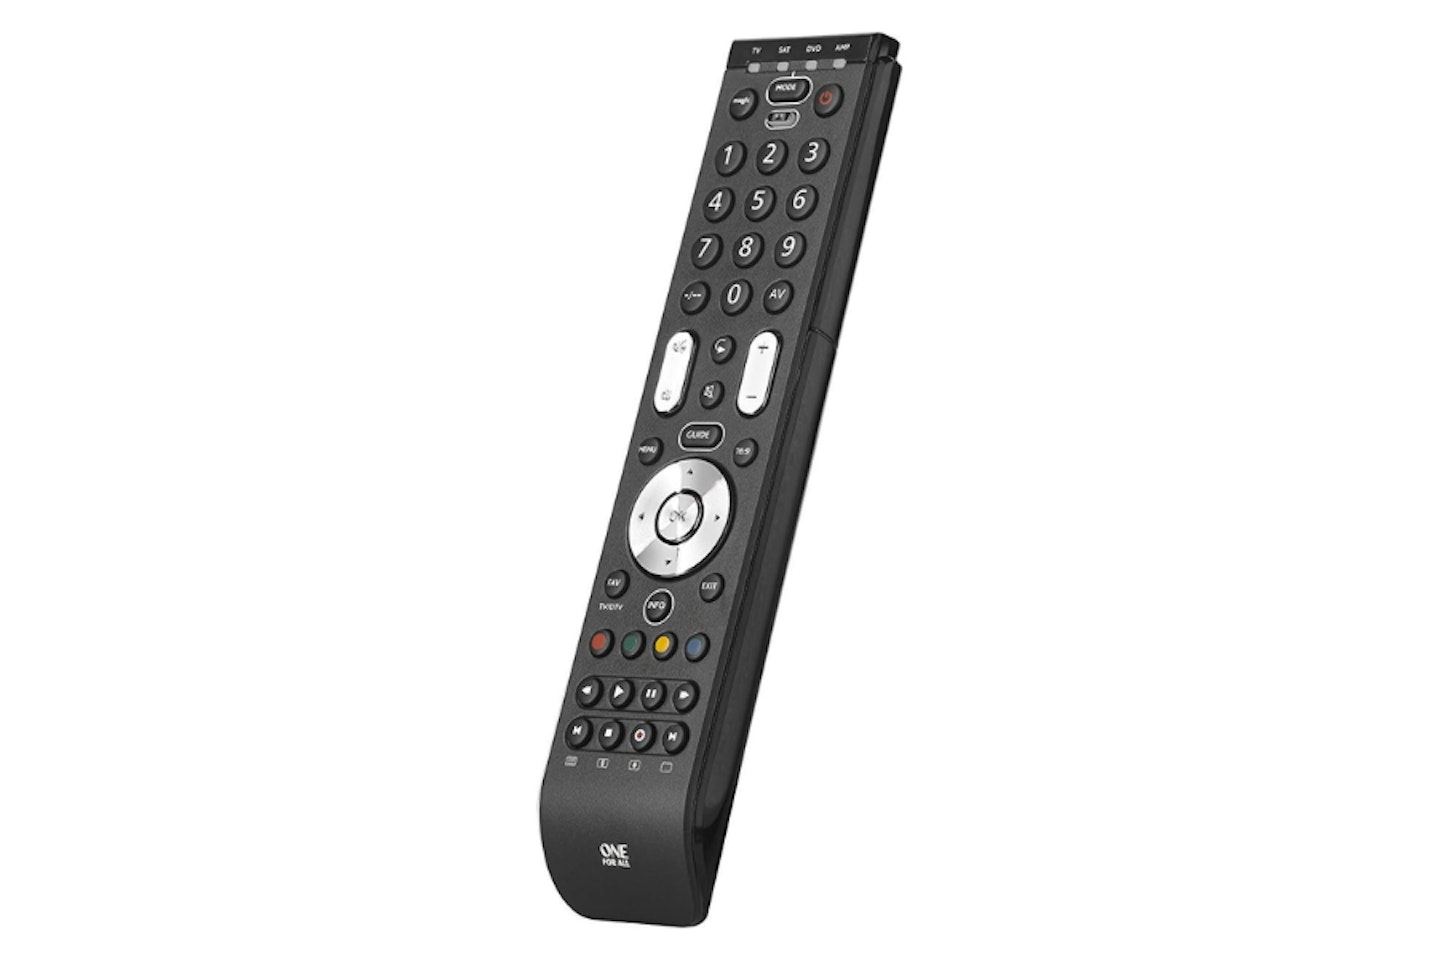 One For All Essence 4 Universal Remote Control - possibly the best TV remote